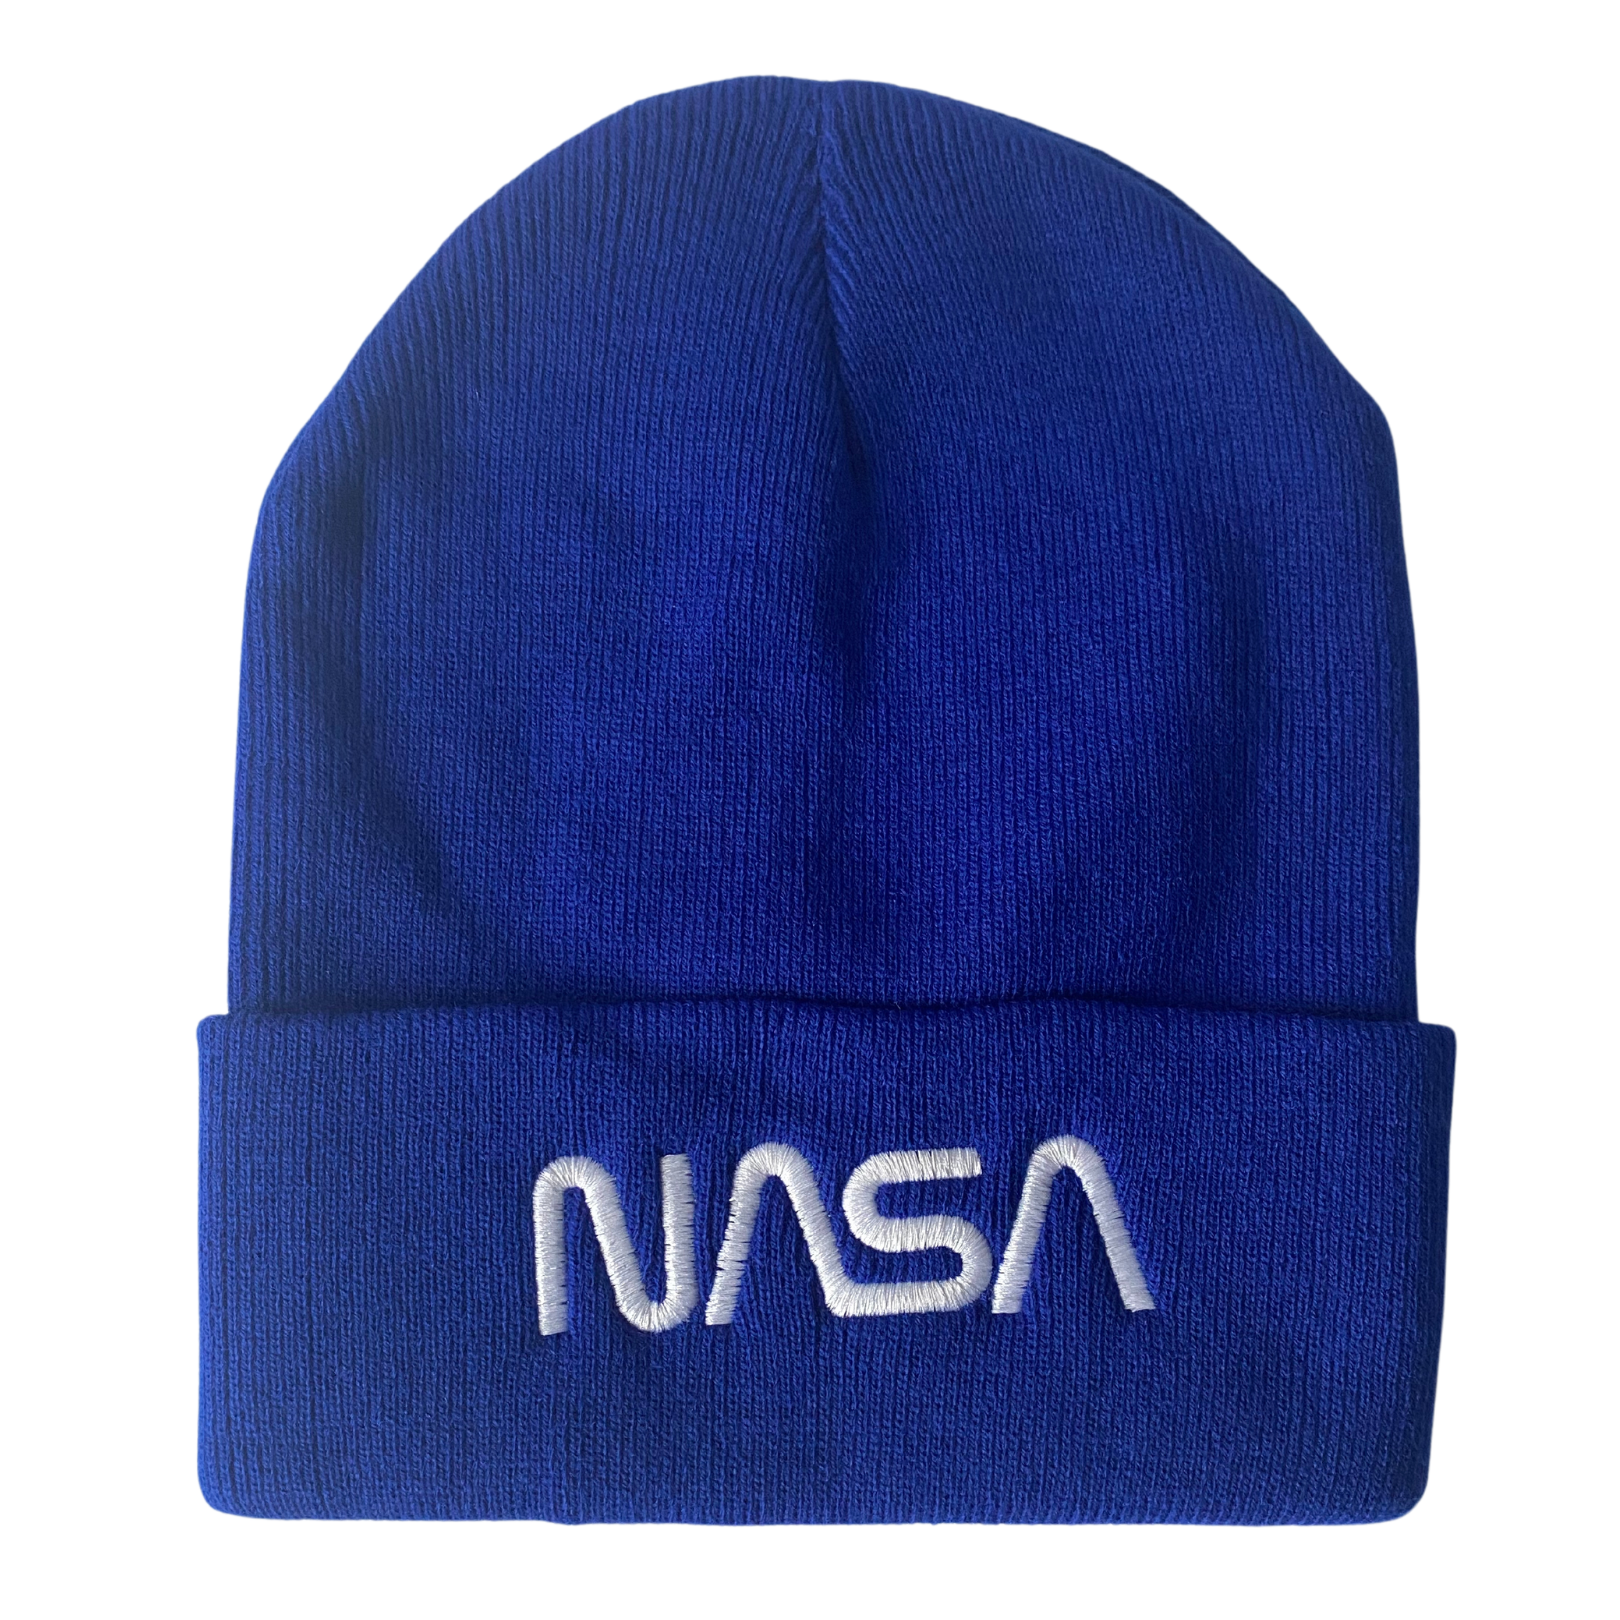 NASA Worm Logo Embroidered Beanie with Cuff - Assorted Colors